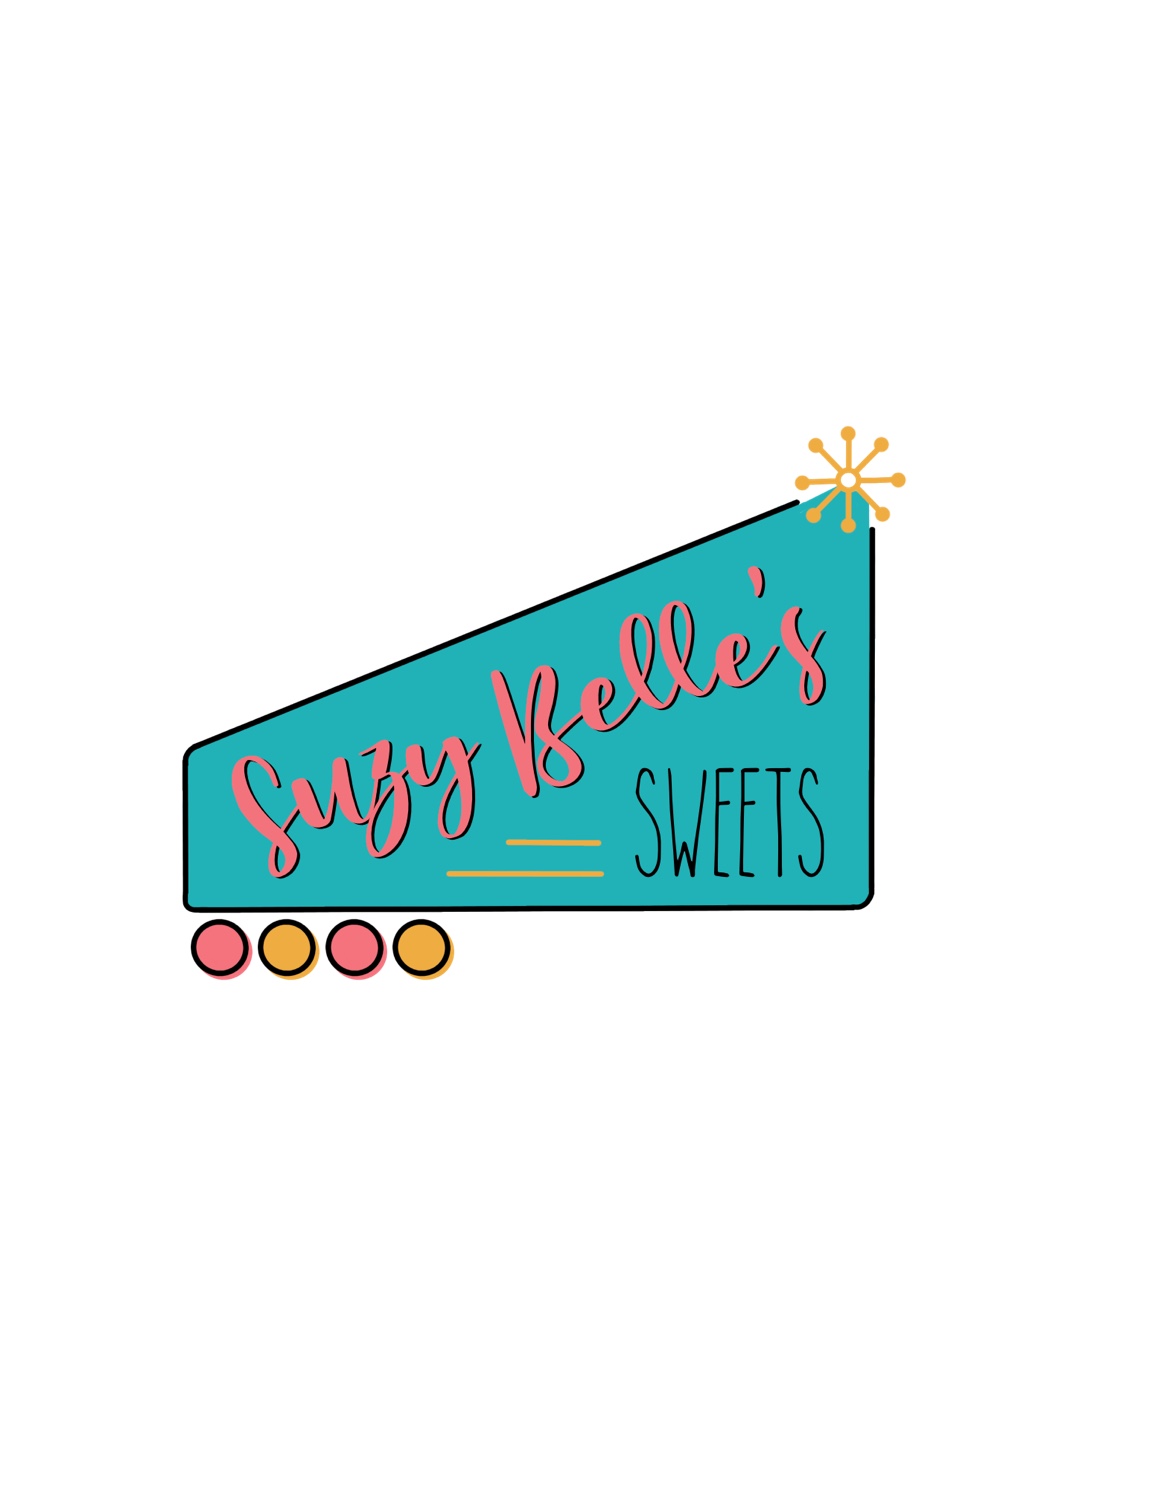 Suzy Belle's Sweets